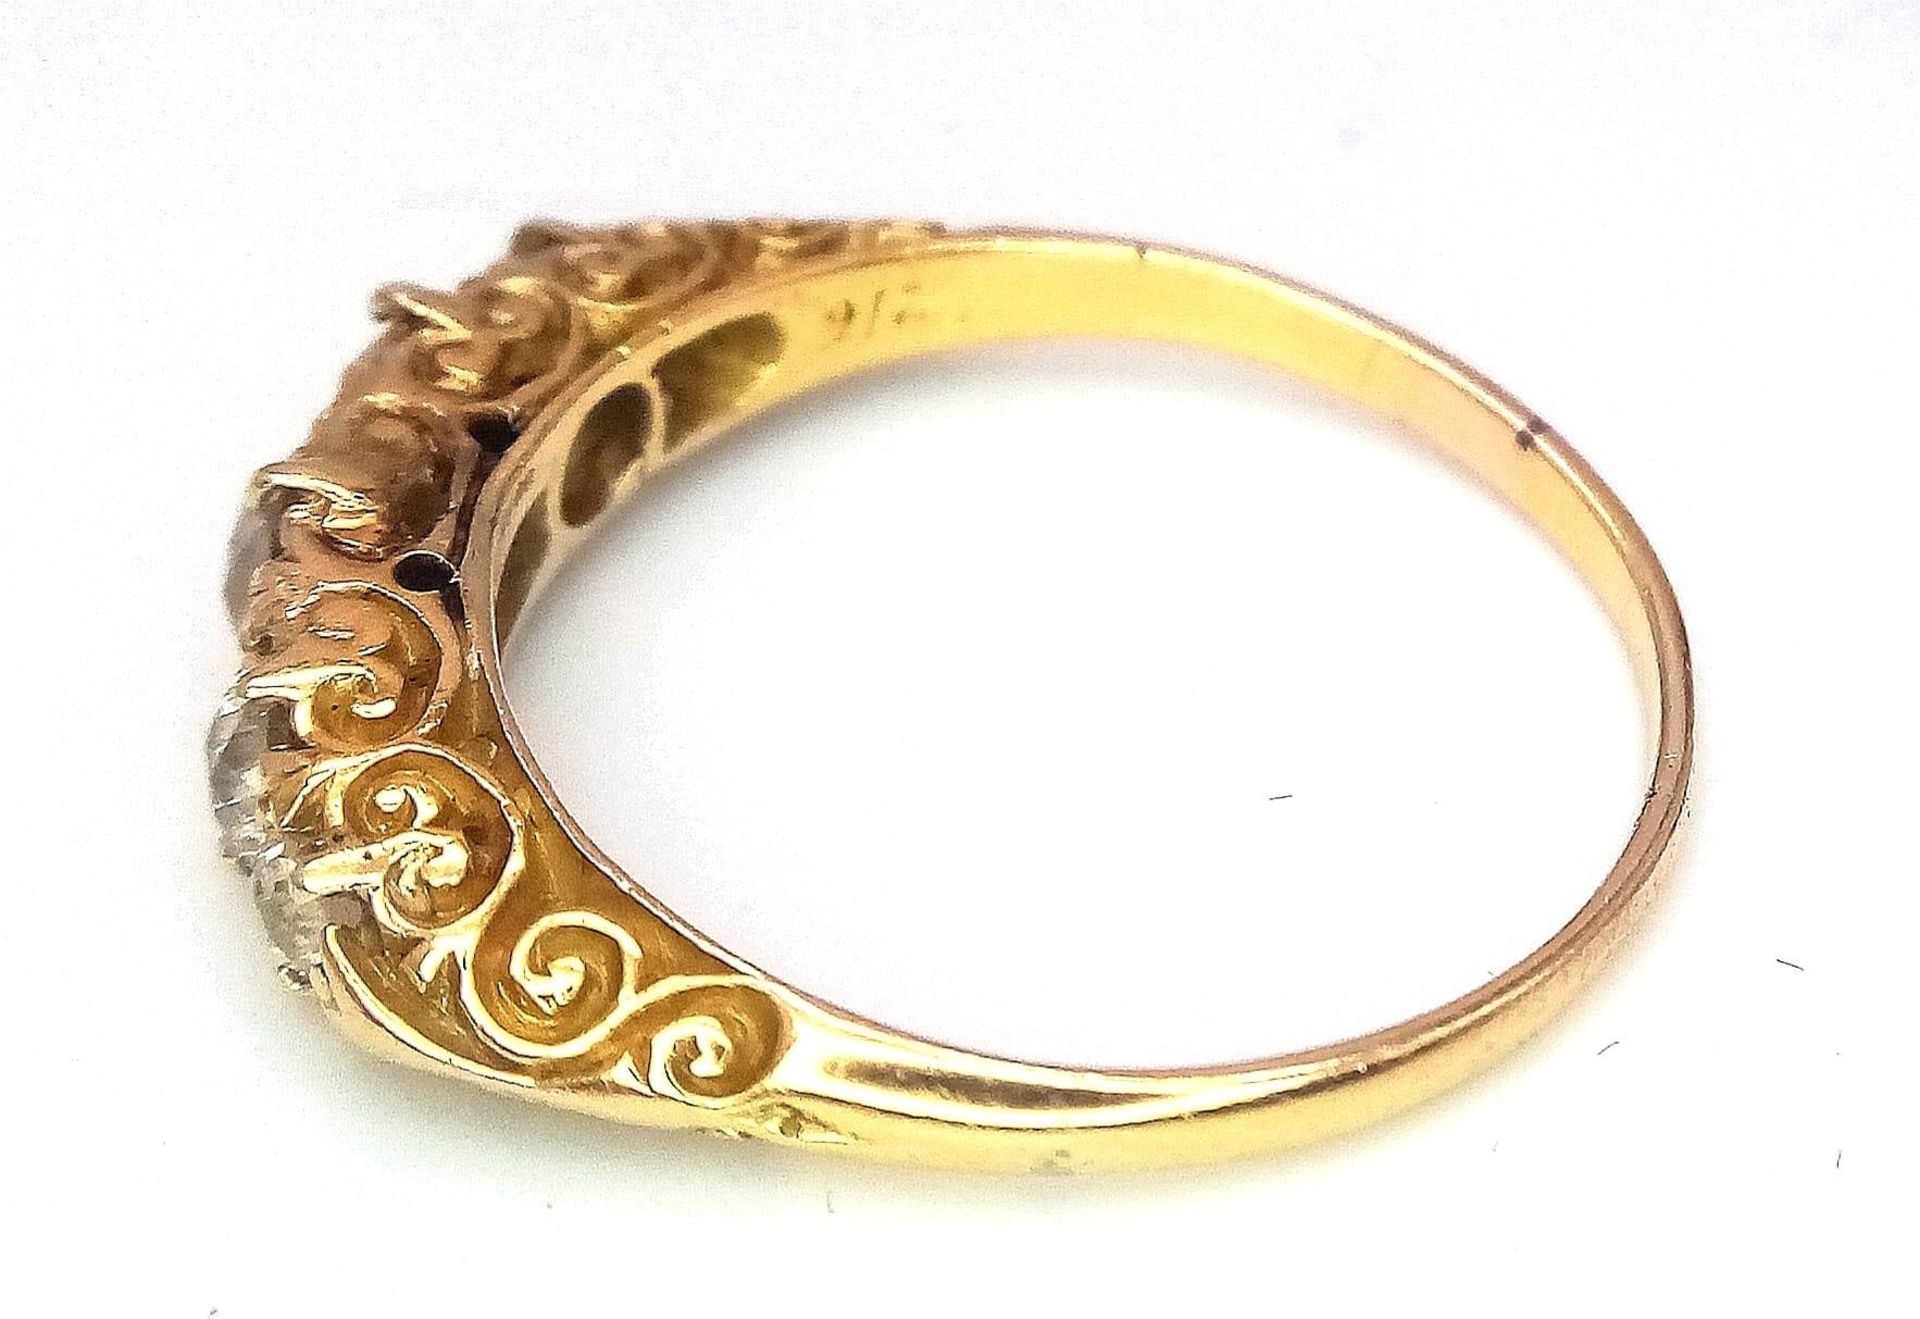 AN ANTIQUE 18K YELOW GOLD DIAMOND 5 STONE SET RING, WITH APPROX 0.60CT OLD CUT DIAMONDS, WEIGHT 2.5G - Image 10 of 13